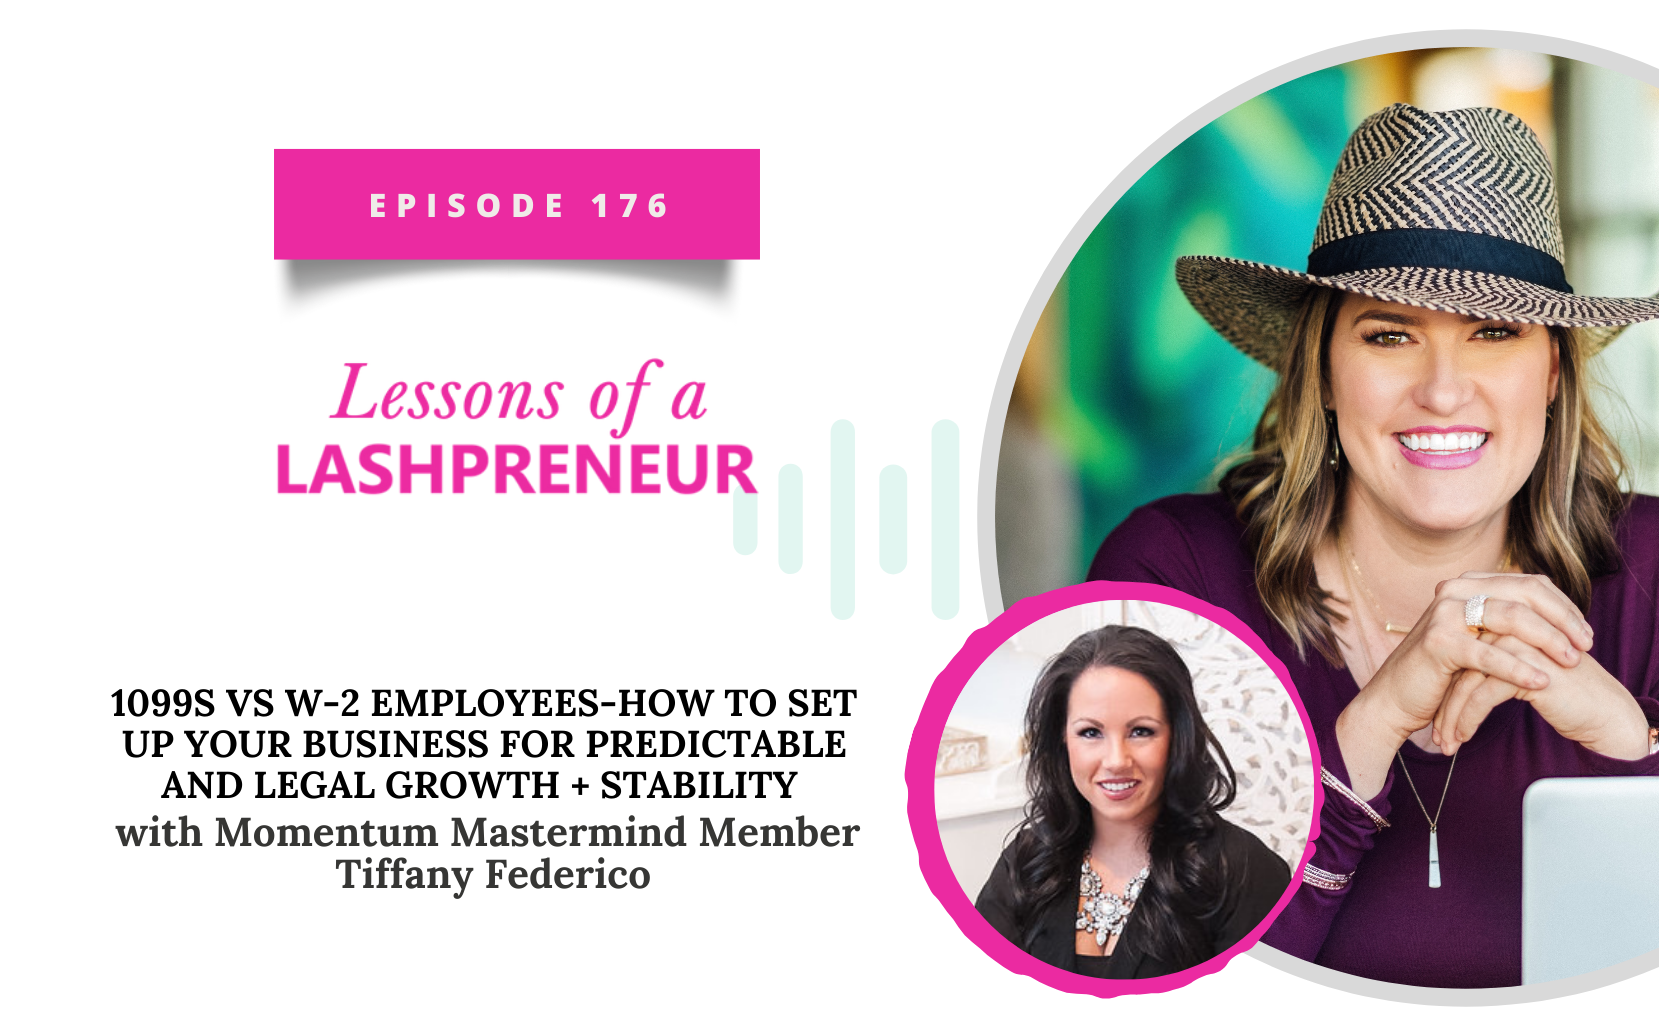 1099s vs W-2 Employees – How to Set Up Your Business for PREDICTABLE and LEGAL Growth + Stability with Momentum Mastermind Member Tiffany Federico